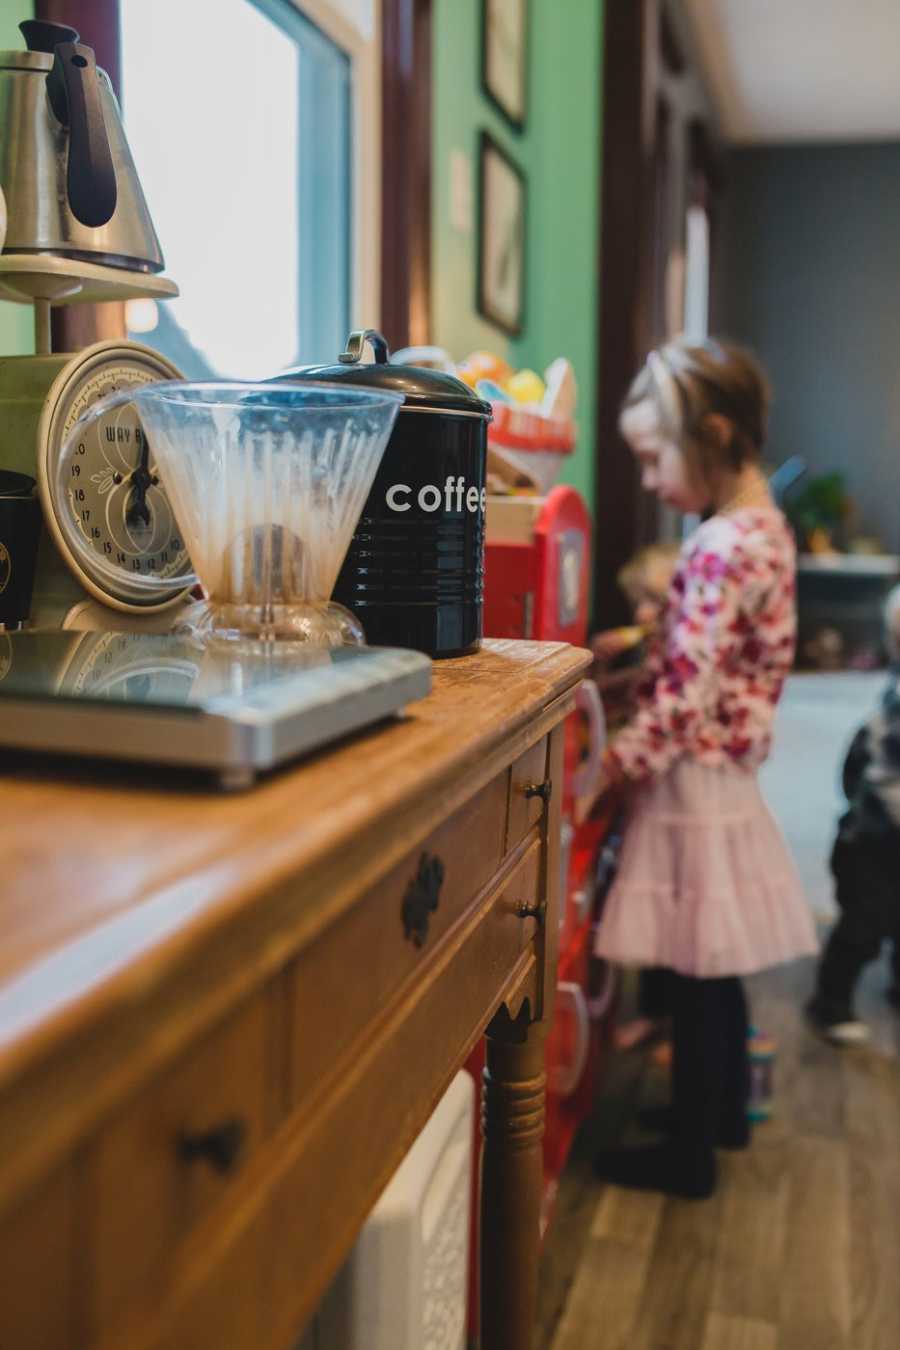 Close up of coffee machine with foster child playing at toy kitchen in background